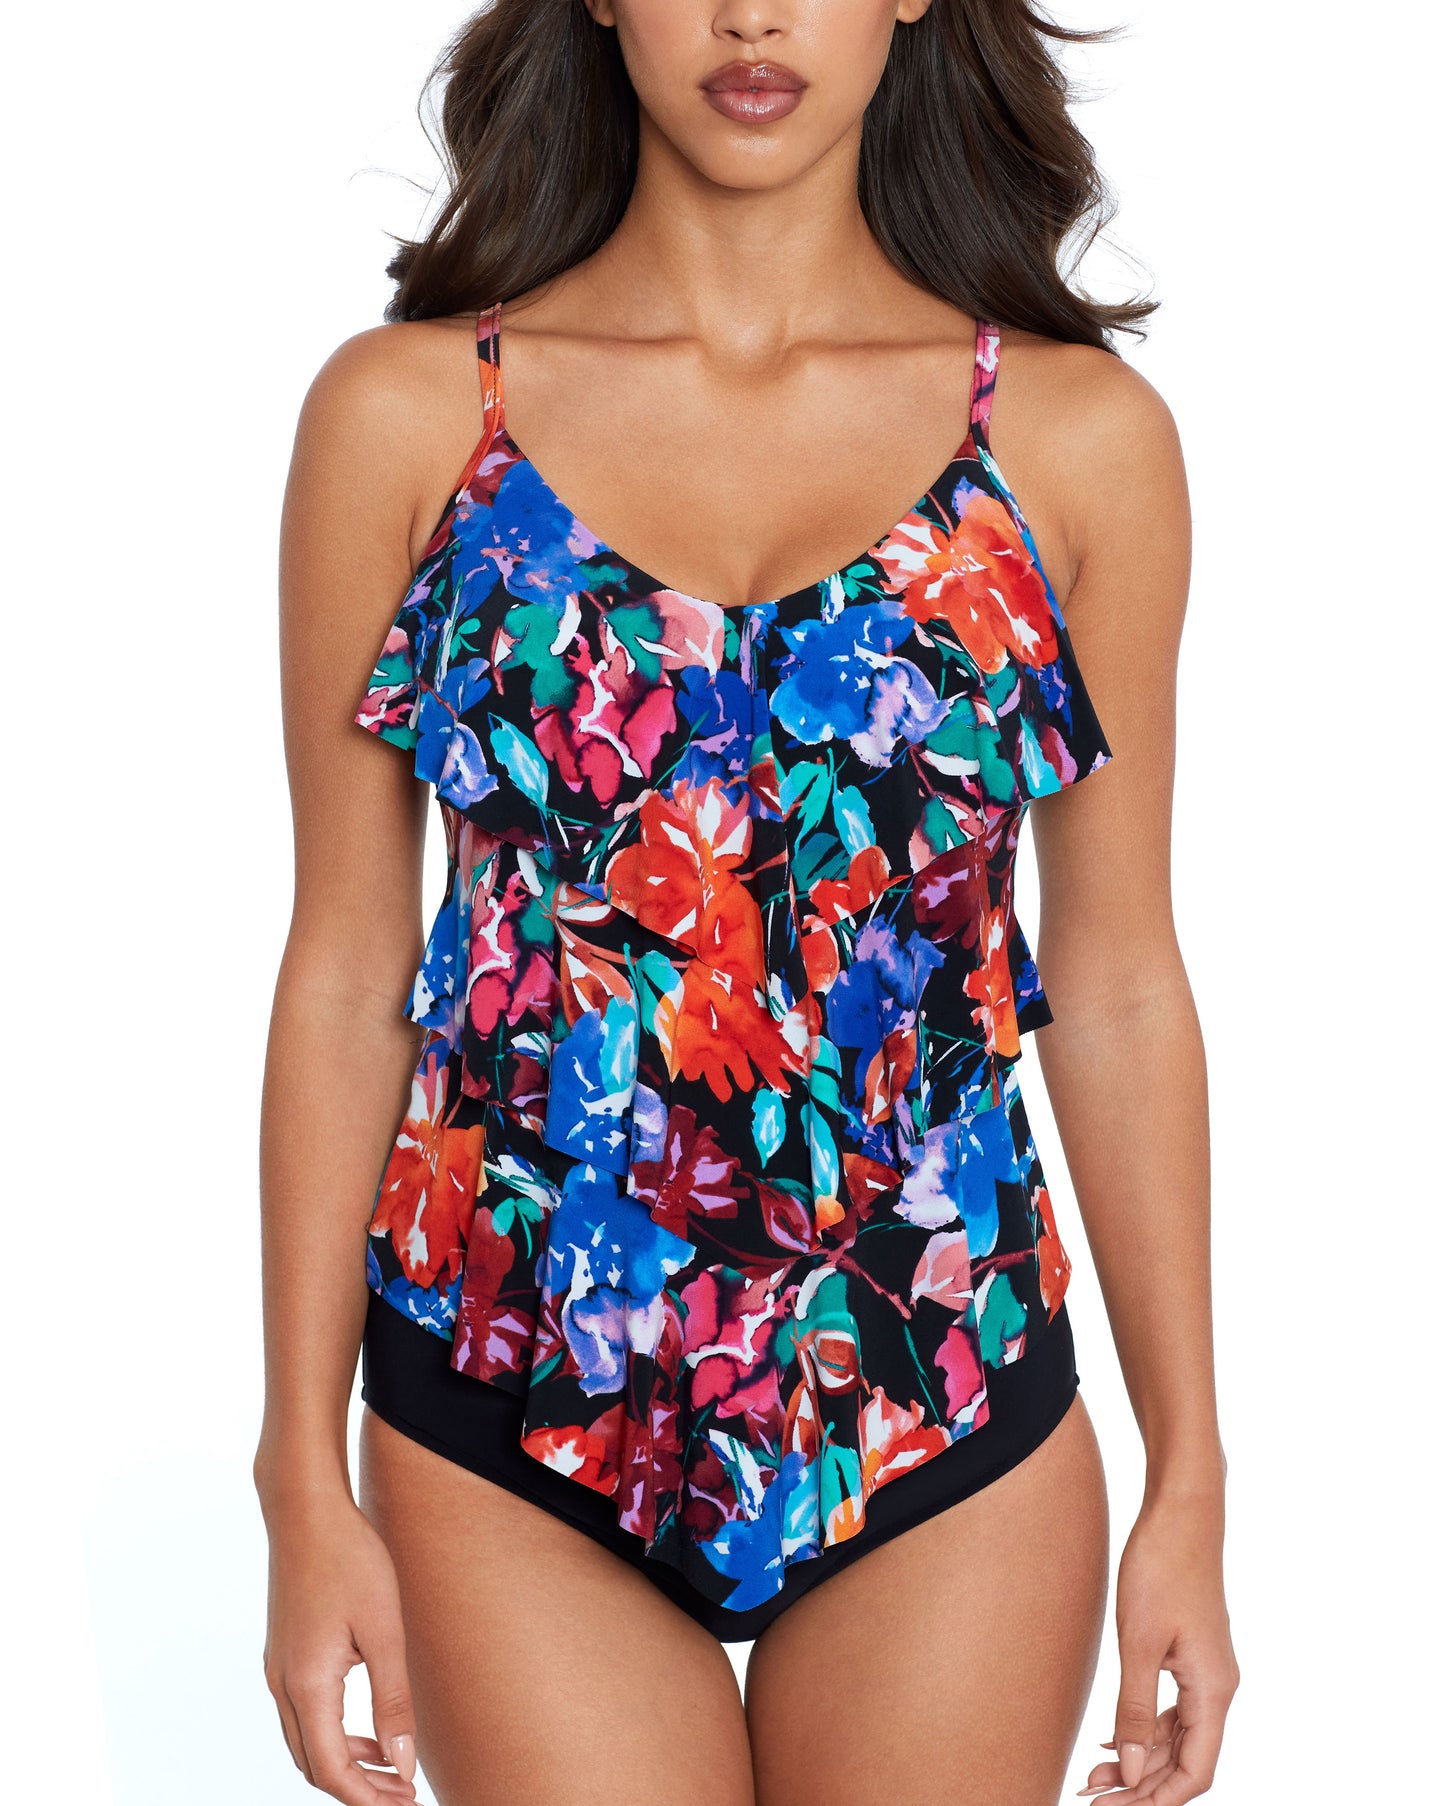 Model wearing a tankini top  with adjustable straps in a black, white, blue and orange print